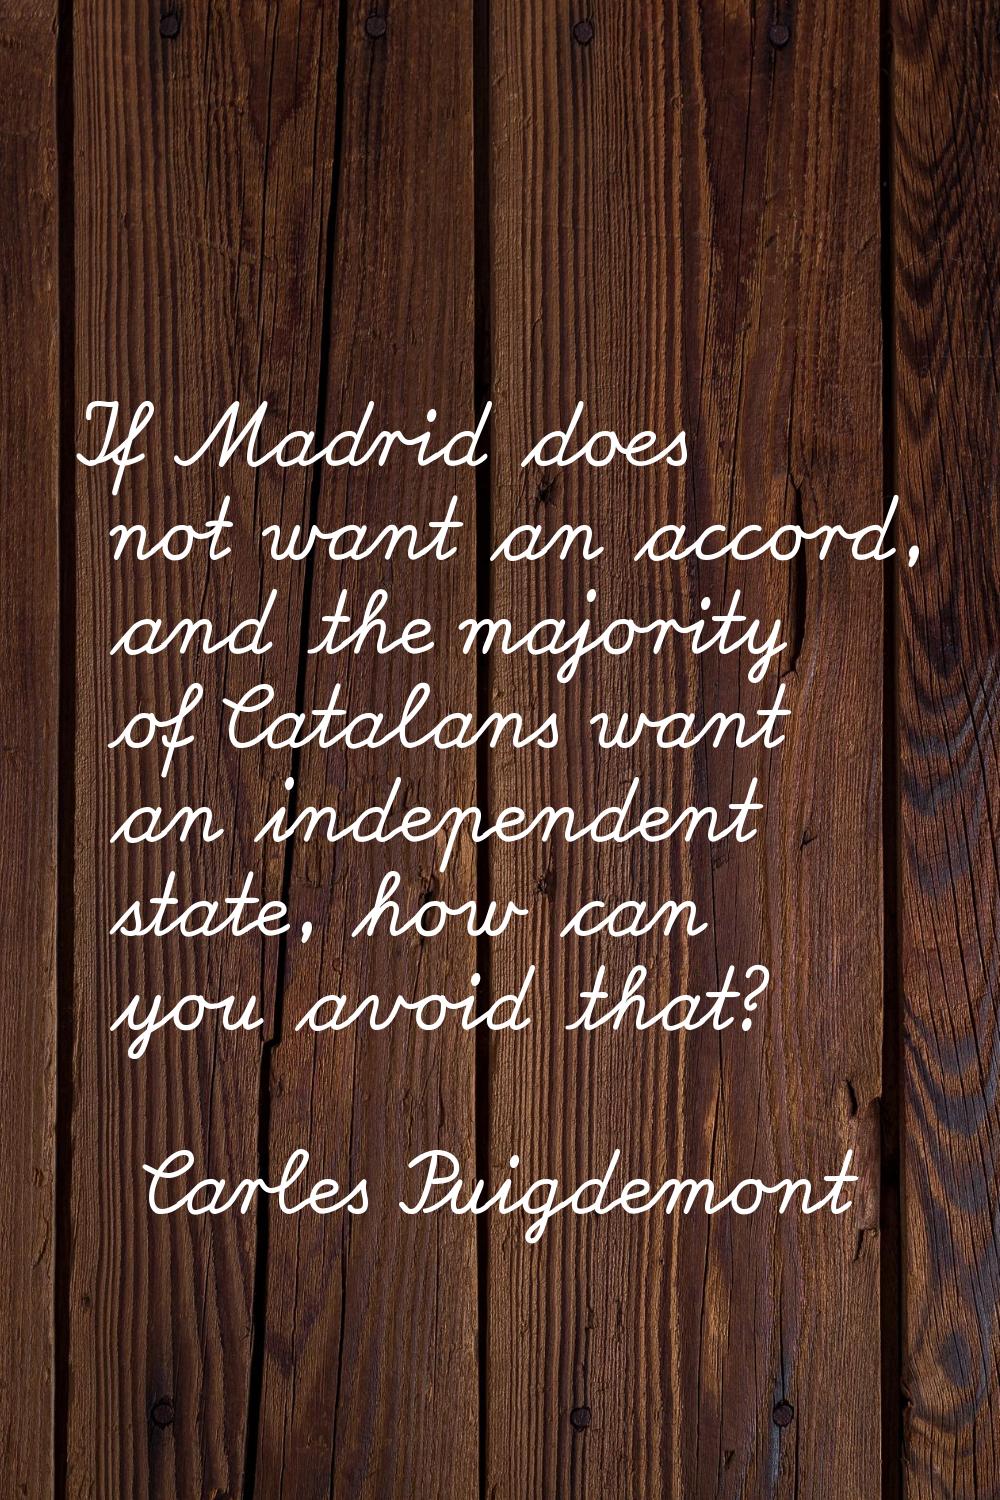 If Madrid does not want an accord, and the majority of Catalans want an independent state, how can 